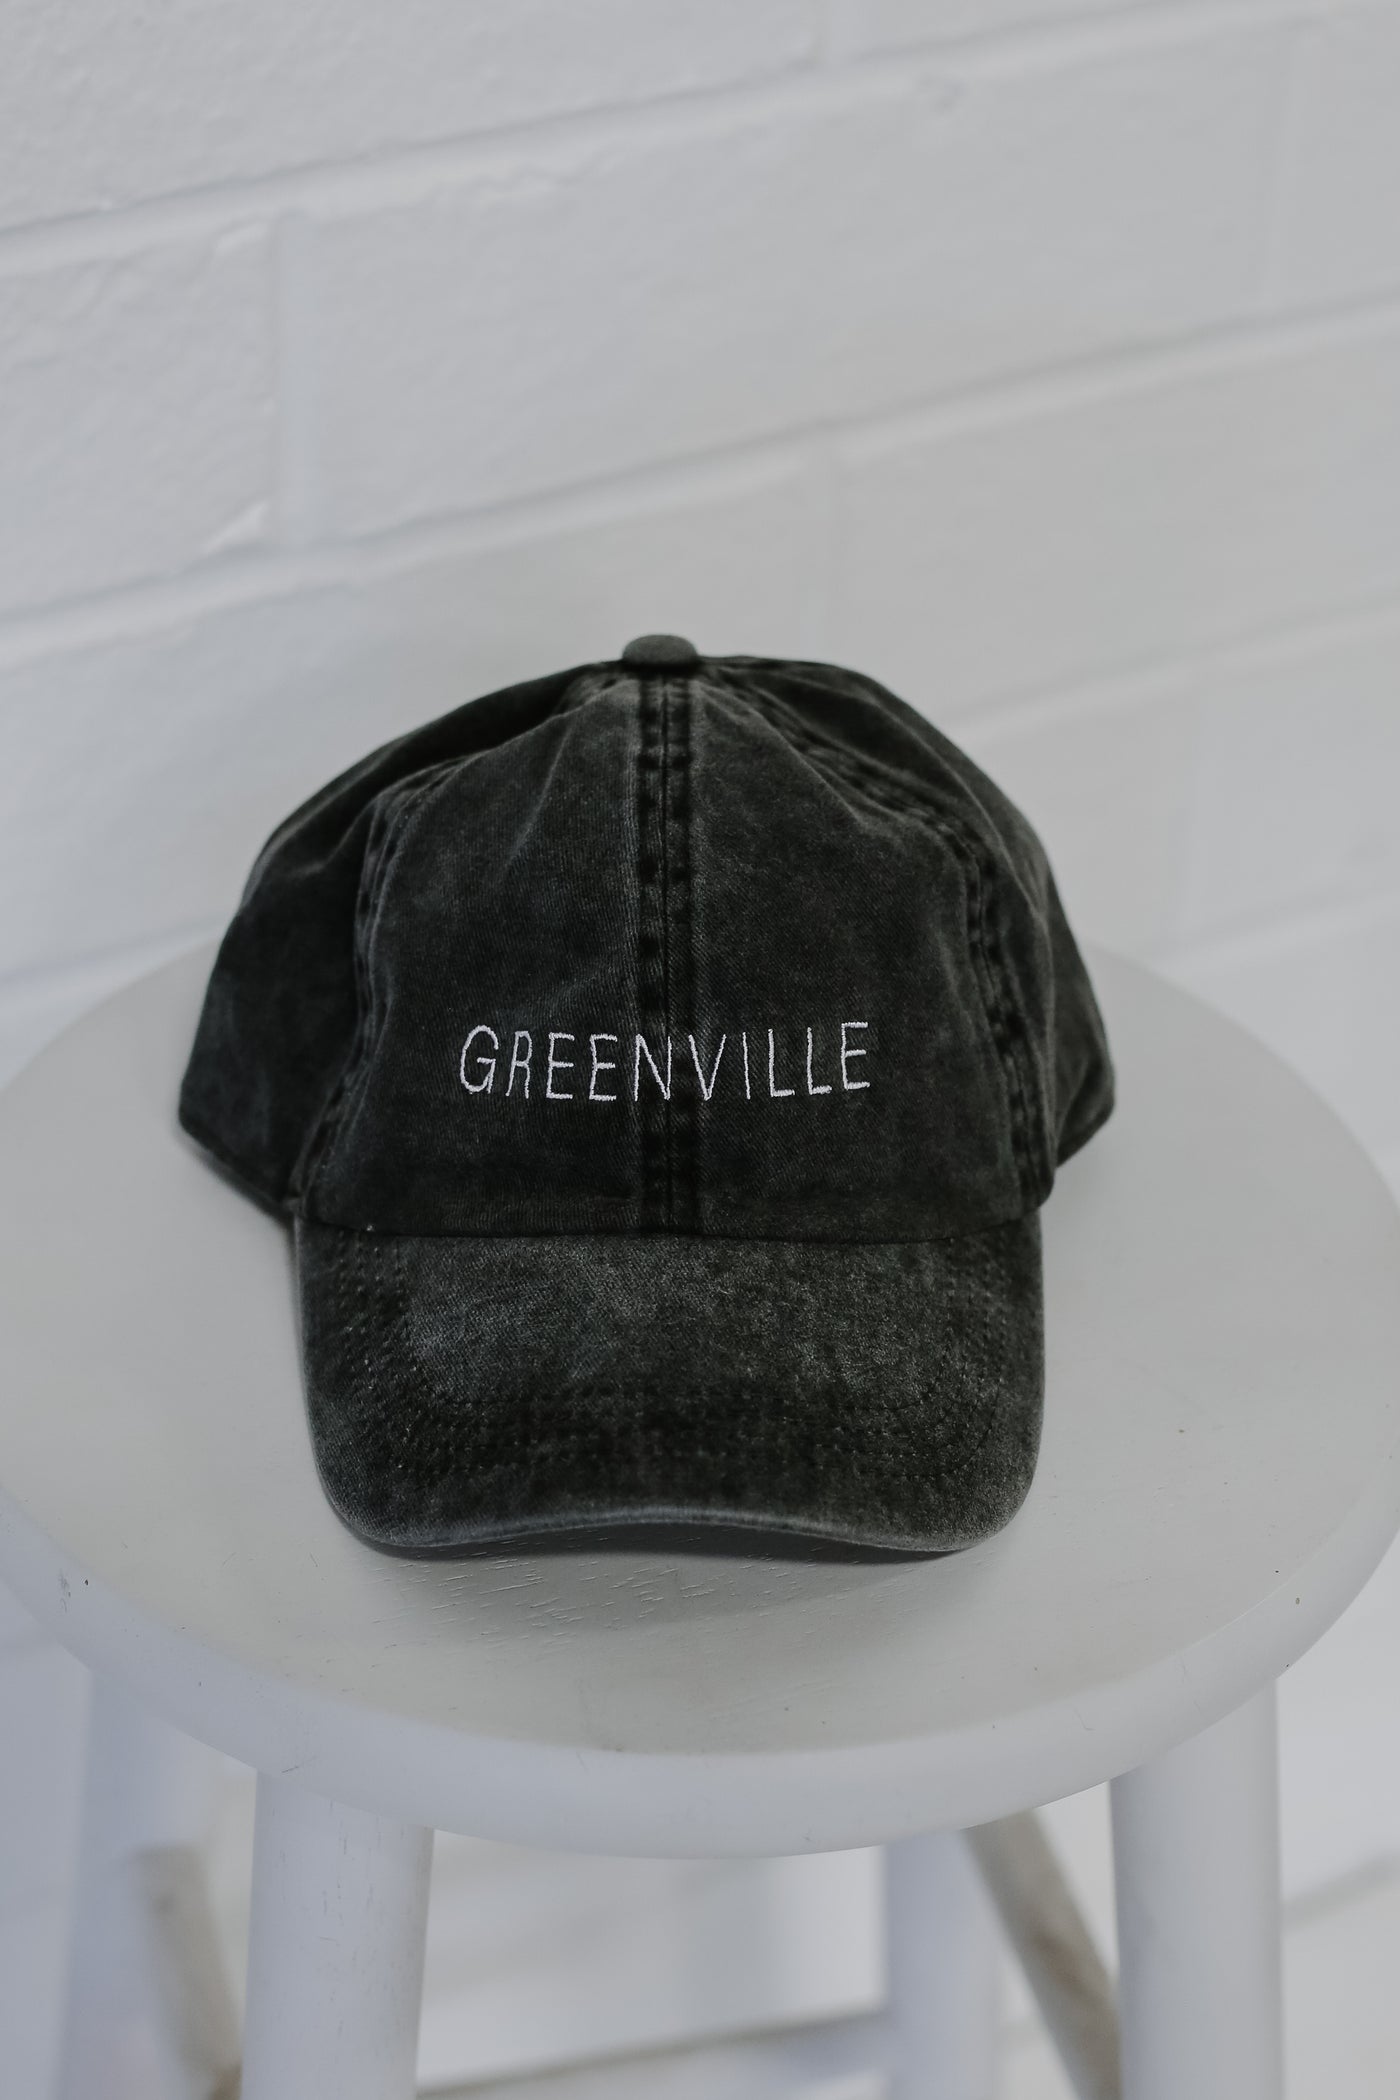 Greenville Embroidered Hat in black flat lay